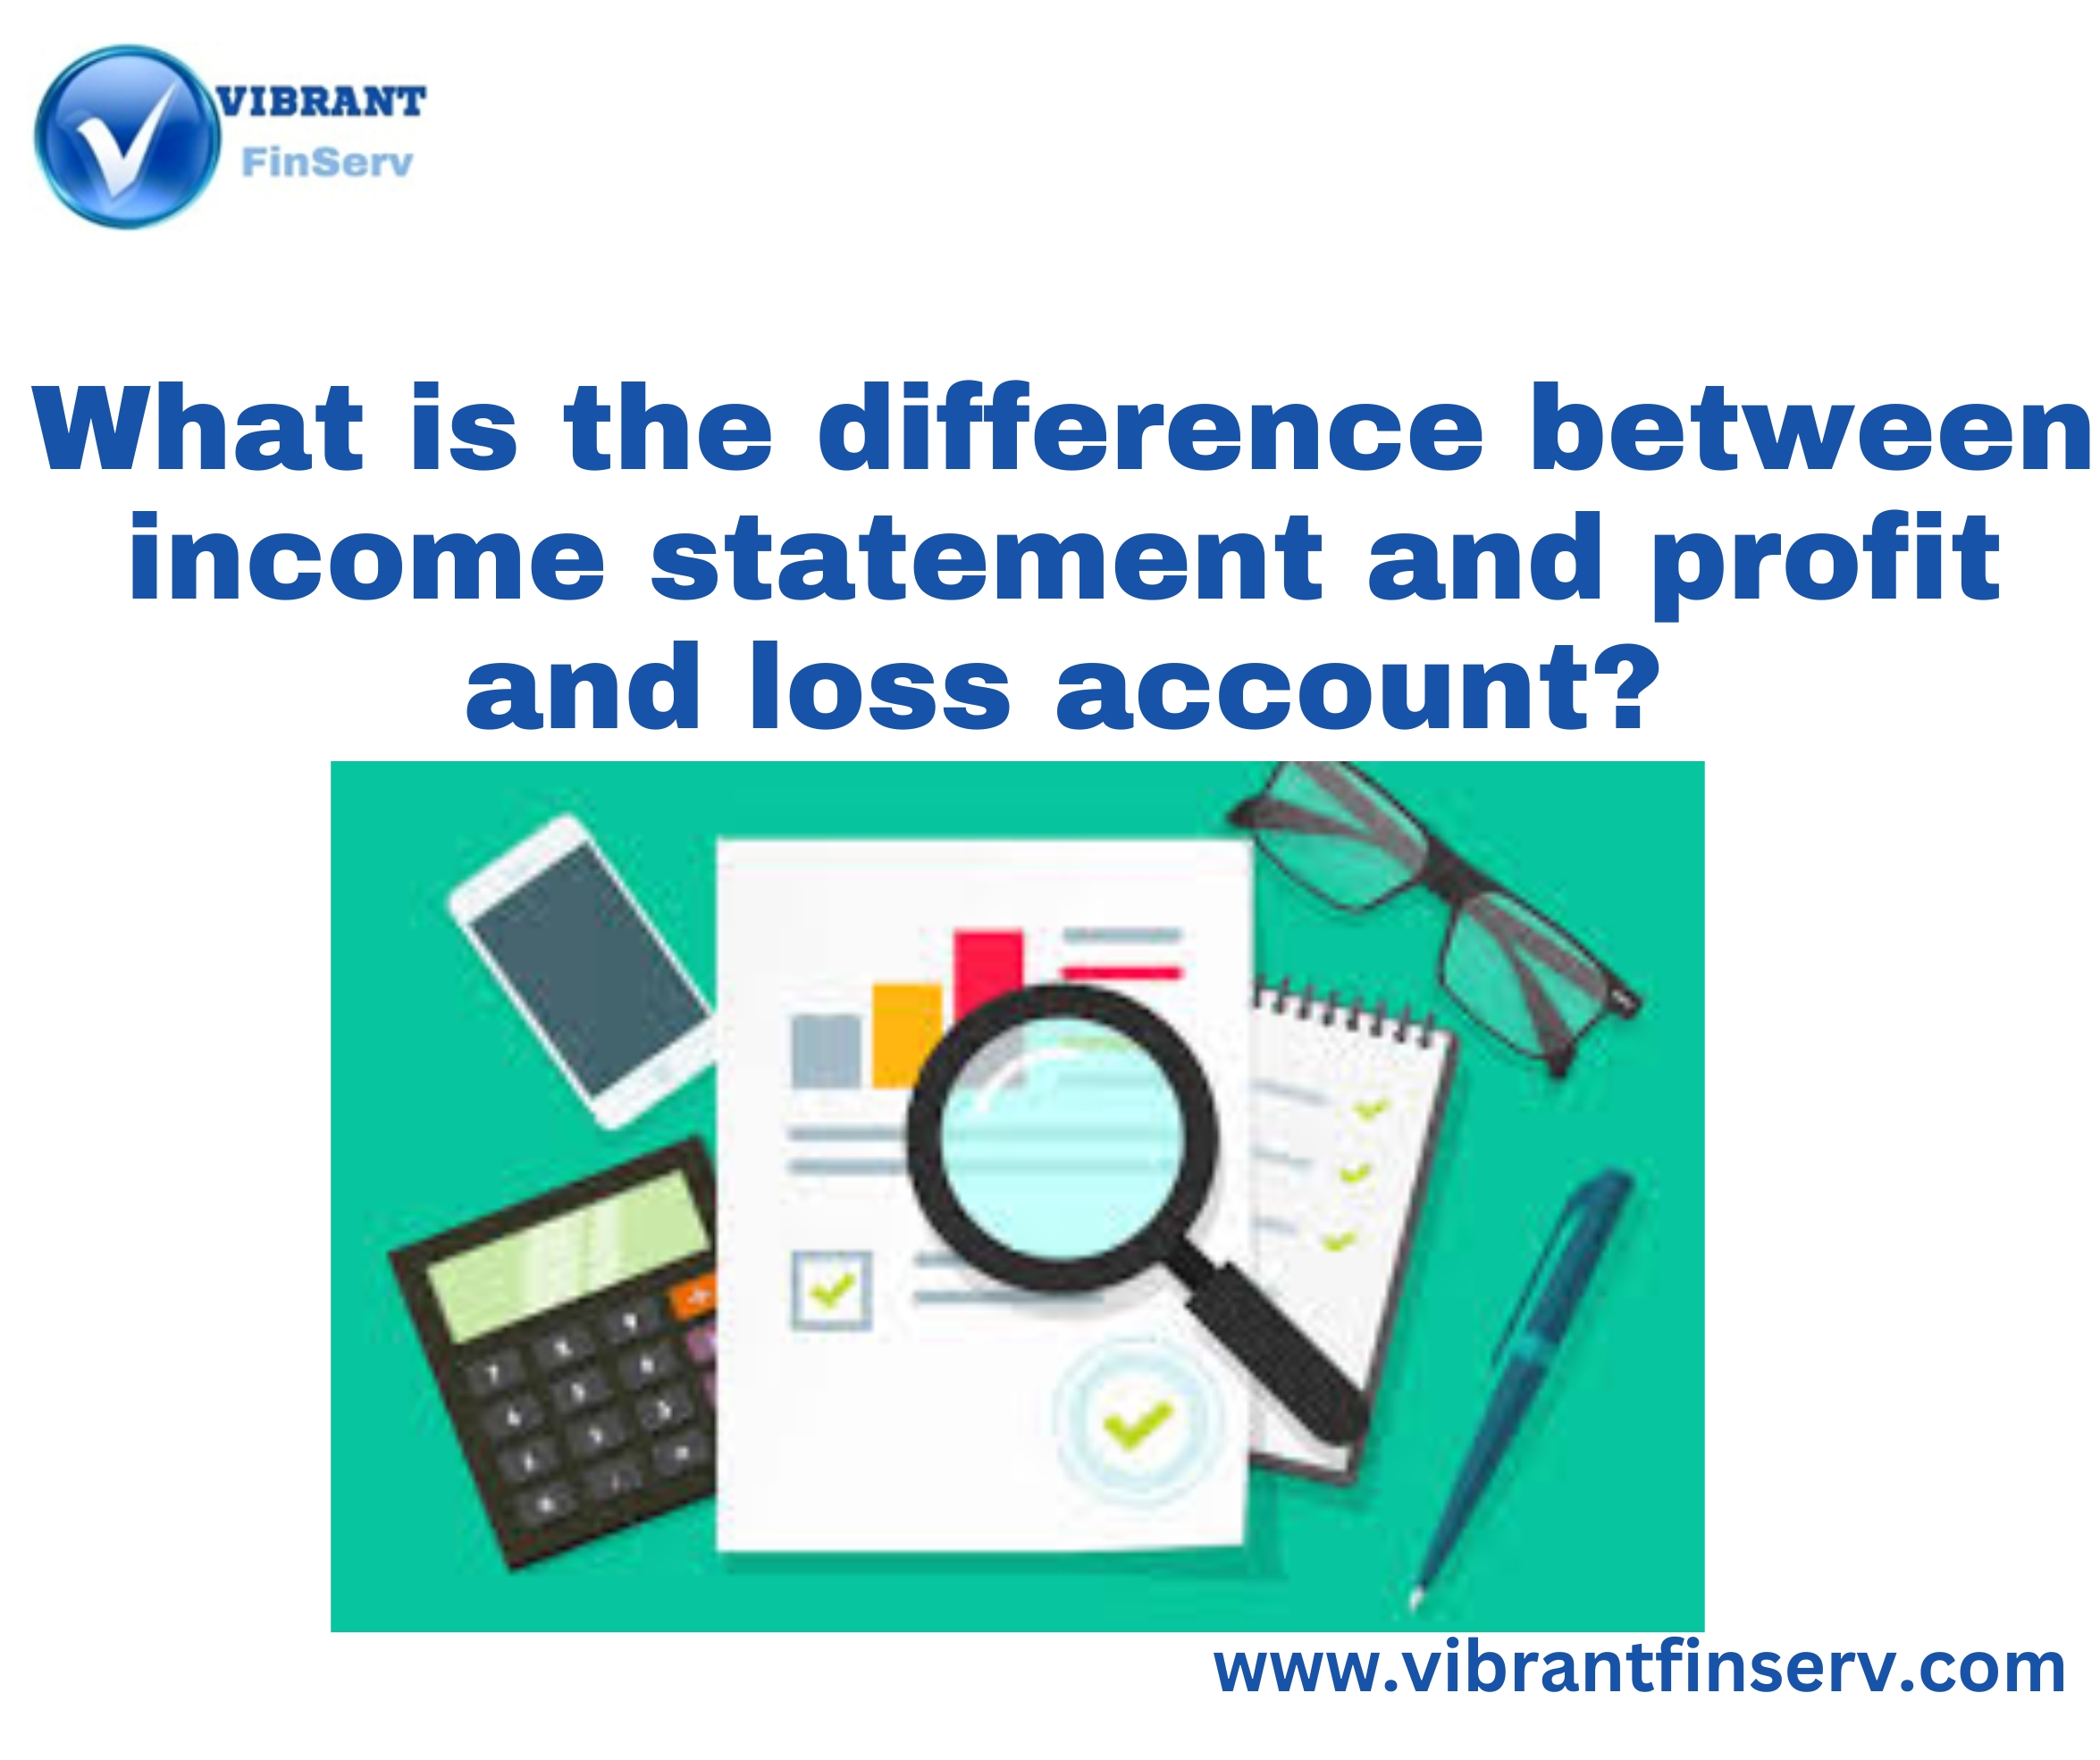 Income statement and profit and loss account